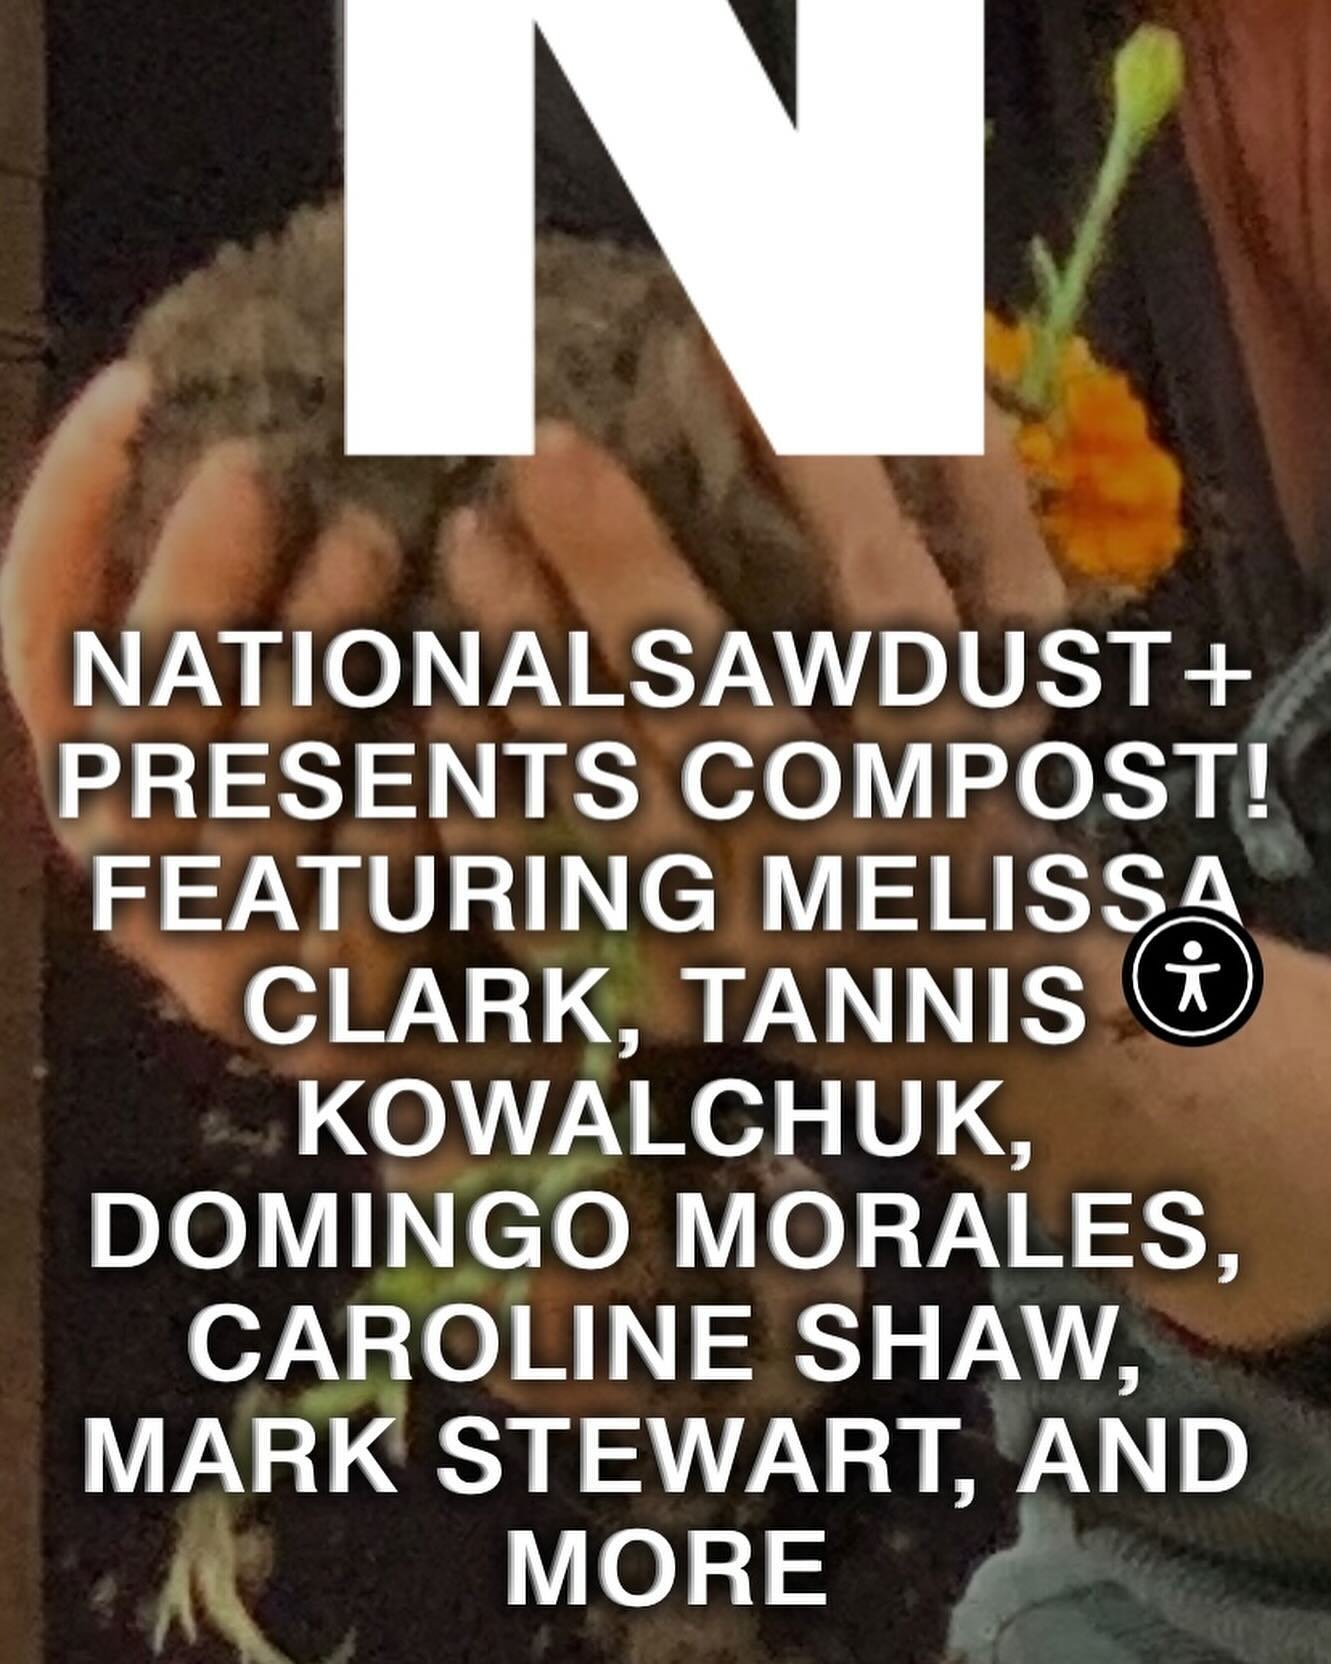 Thursday the 25th, Tannis will be at National Sawdust in Williamsburg @nationalsawdust performing and talking dirt (well COMPOST) with Melissa Clark, NYTimes Food writer @clarkbar (of so many good recipes to eat and live by) and NYC compost activist 